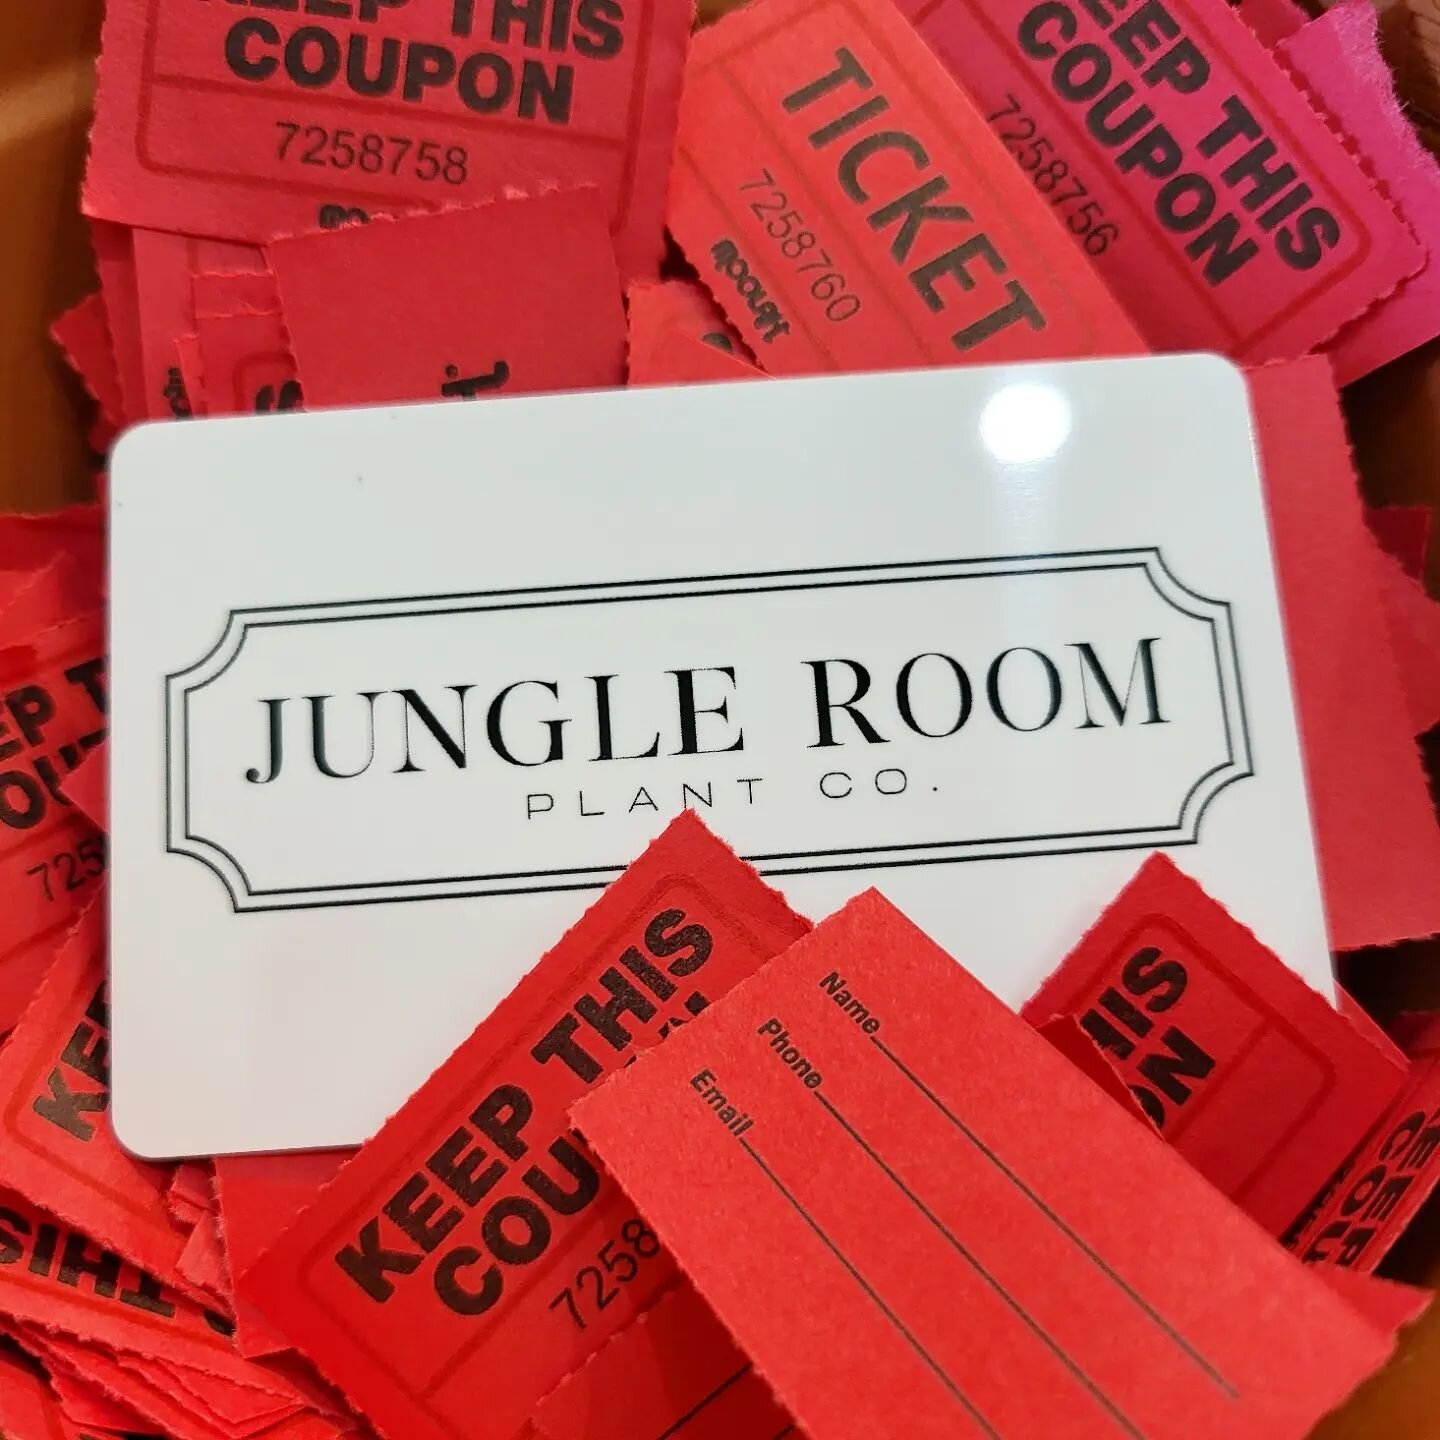 Have you entered our raffle drawing yet?!?

For every $10 you spend at The Jungle Room from 07/25/23- 07/30/23, you receive a raffle ticket. 

On 07/30/23 (tomorrow) after closing at 4 p.m., I will pull 3 lucky tickets live on Instagram. 2 will win $